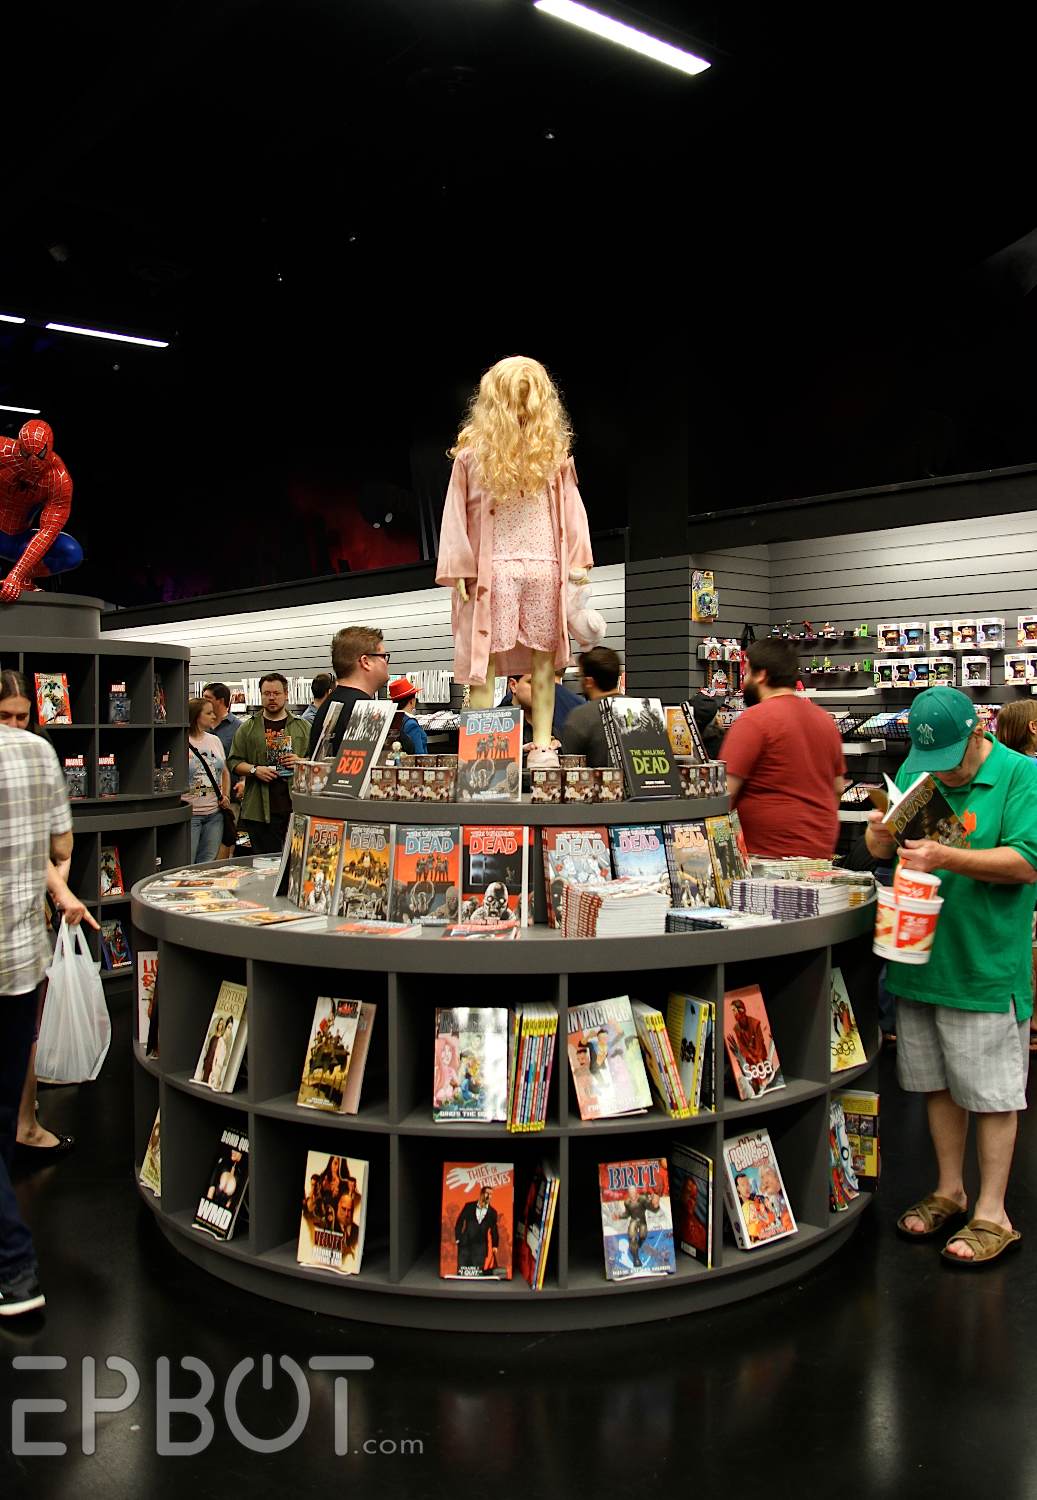 Nation's second-largest comic shop to open at Artegon Orlando